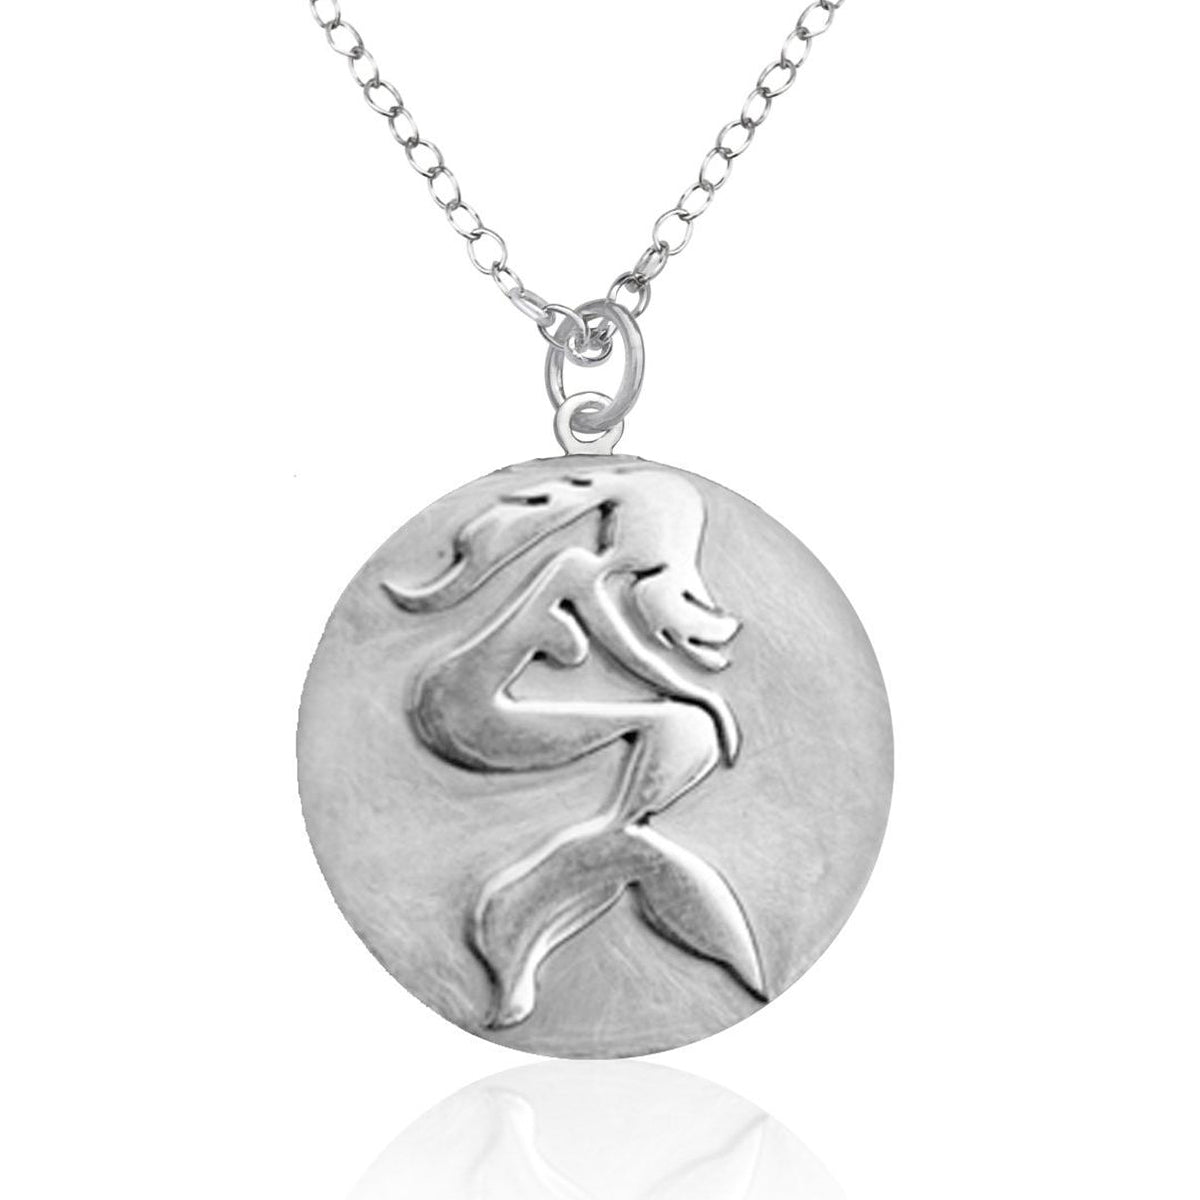 Sterling Silver Sitting Mermaid Ocean Inspired Necklace from the Miss Scuba Jewelry Collection